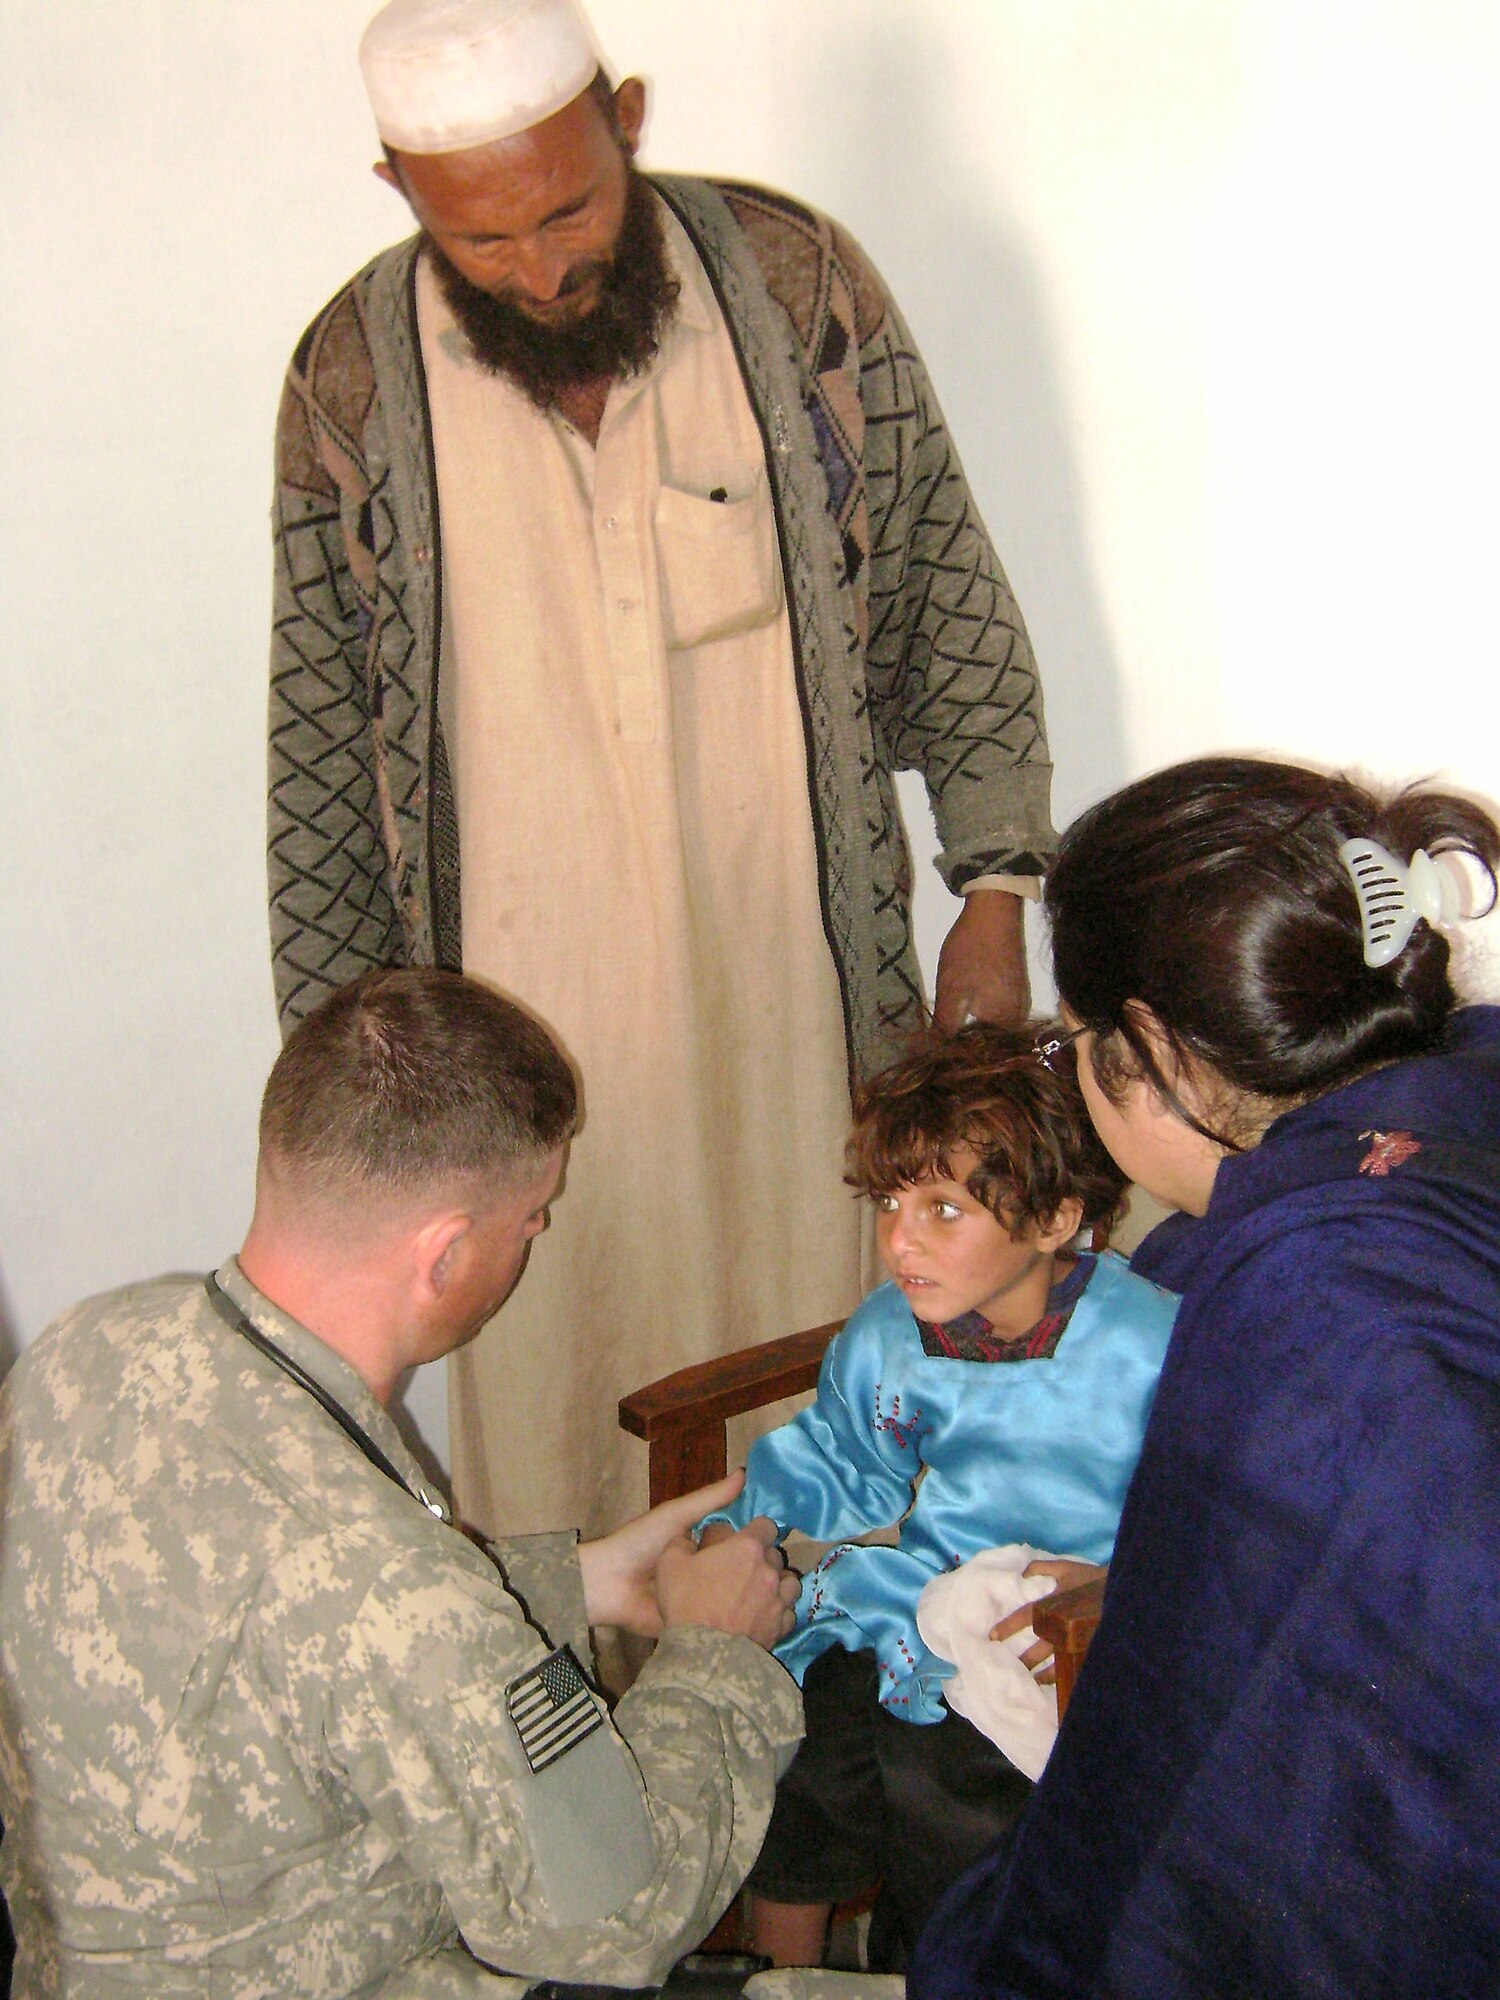 Technical Sgt. Kyle Baker examines an injured girl at the Hope of Mother Clinic Feb. 24 in the Surkh Rod District of Afghanistan. Sergeant Baker is a medic with the provincial reconstruction team in Afghanistan's Nangarhar province. (U.S. Air Force photo/Capt. Dustin Hart) 
